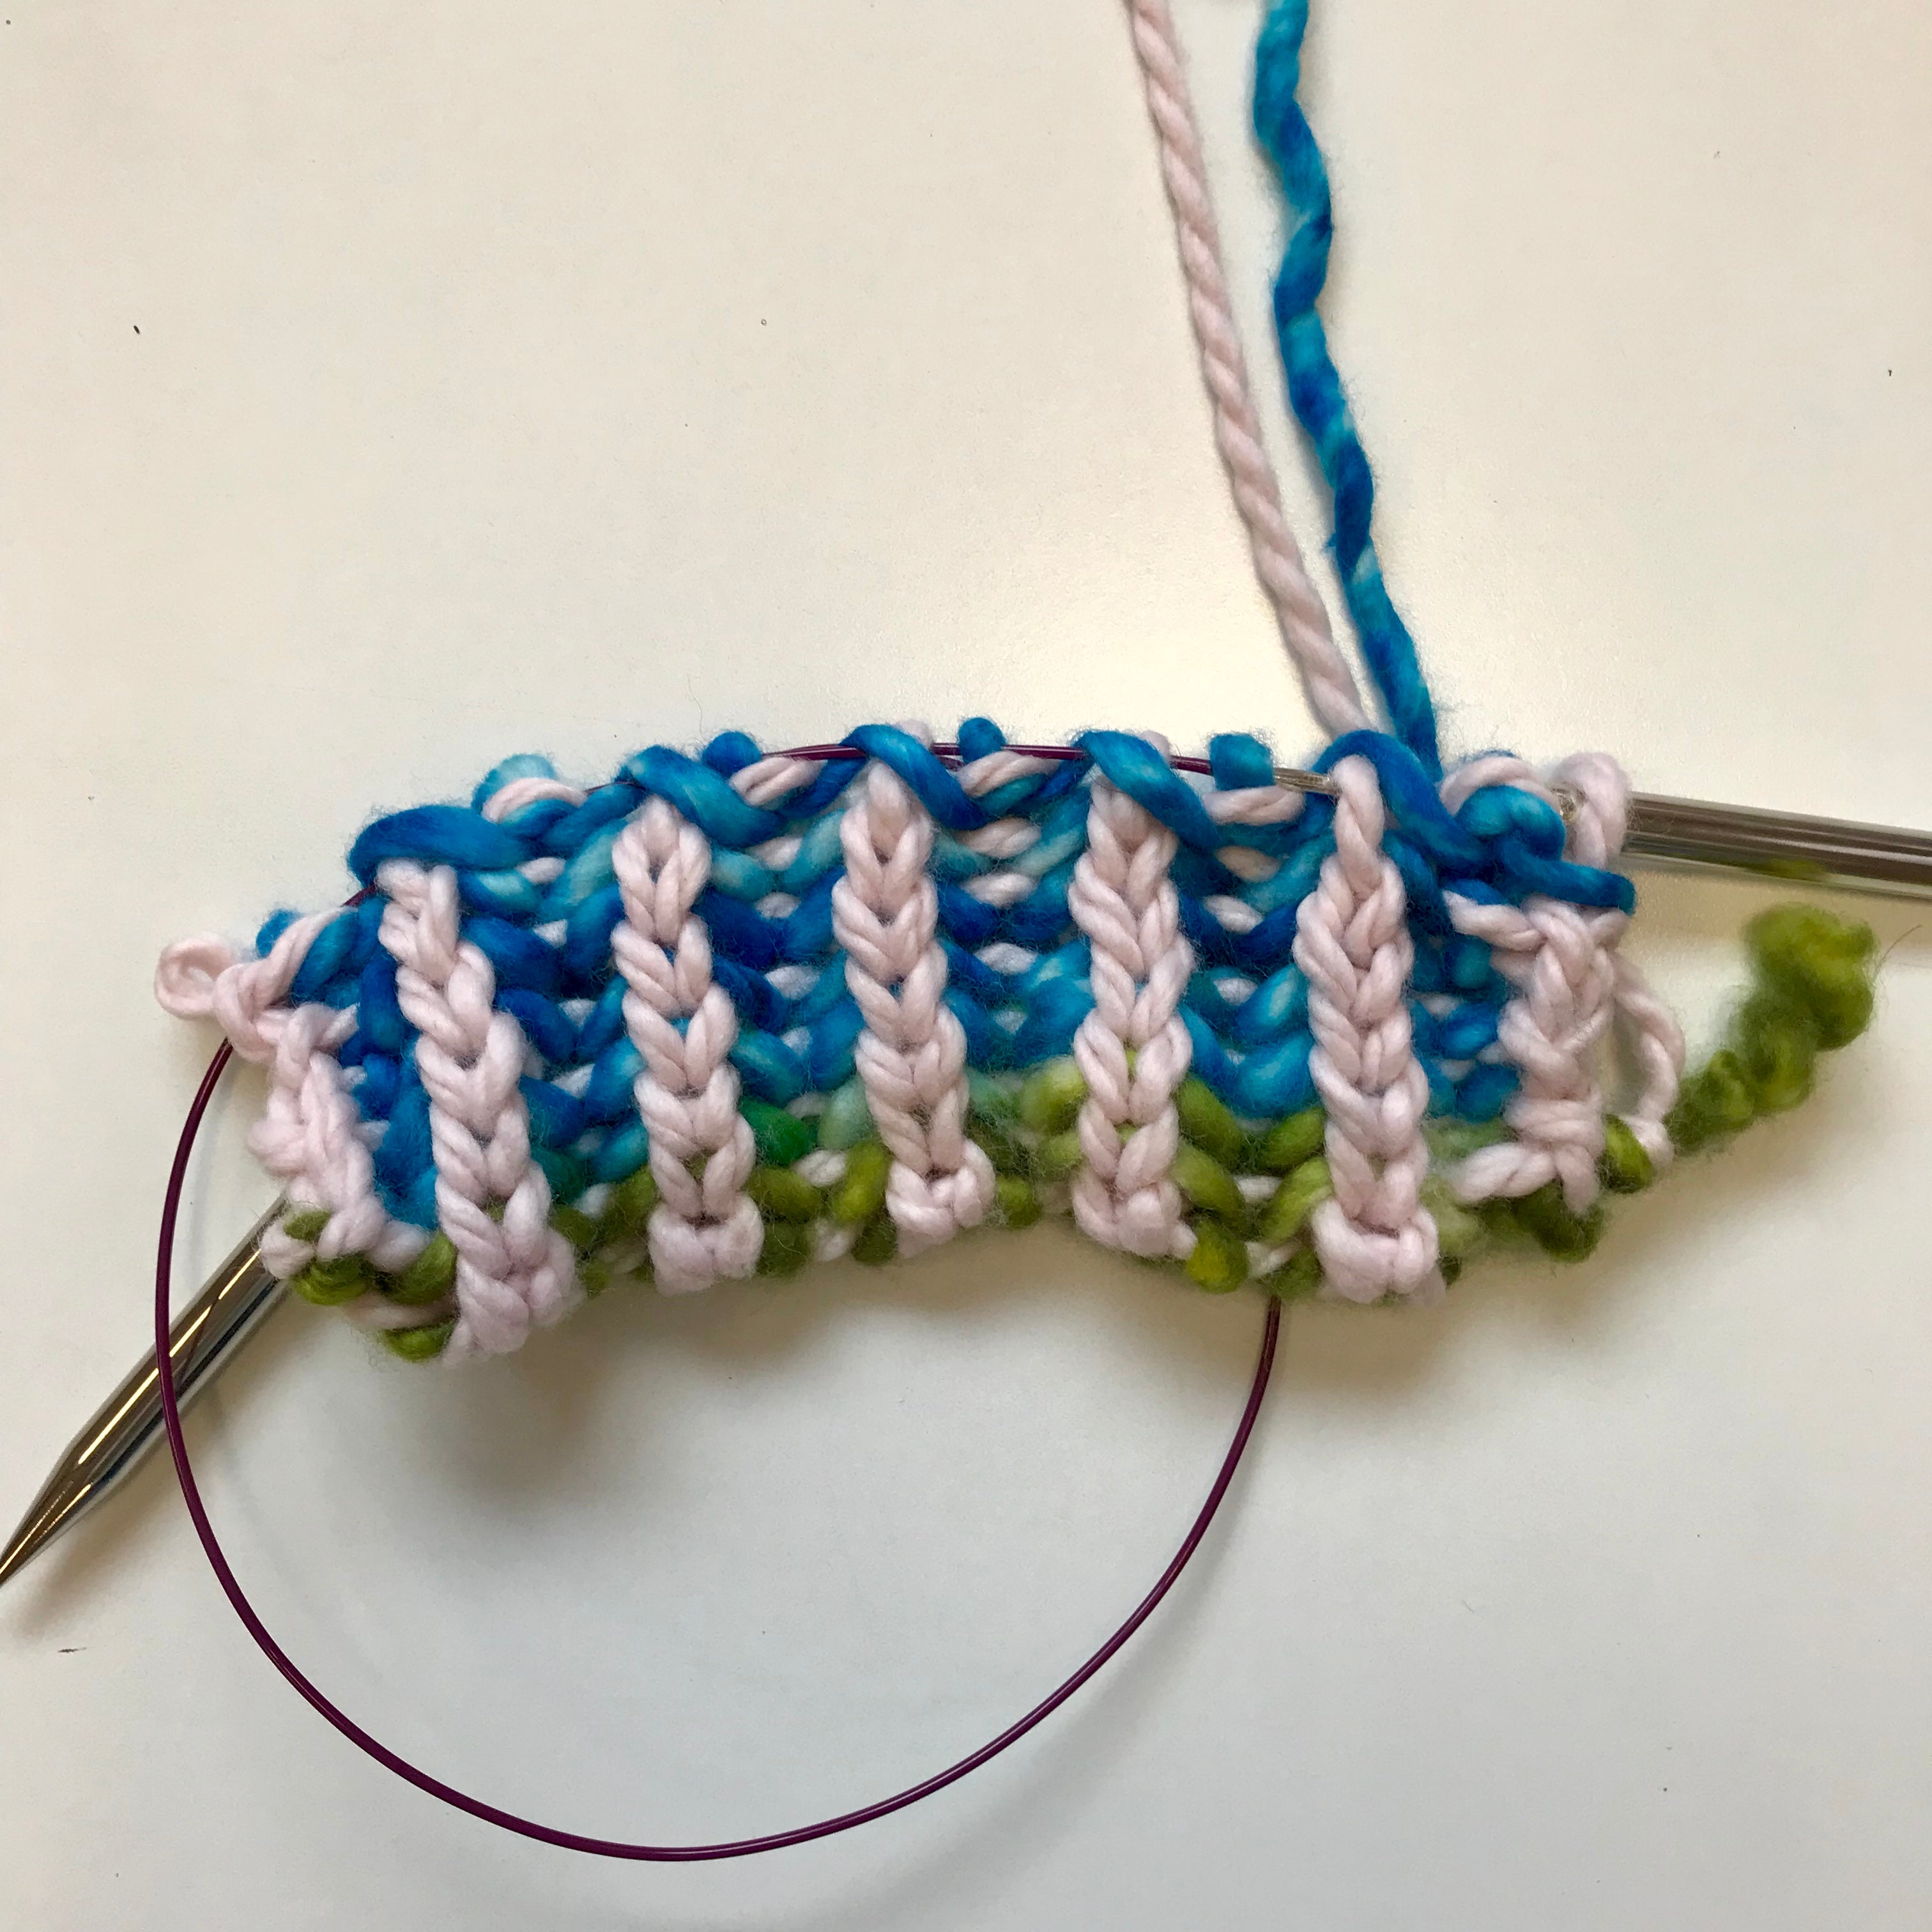 How To Knit: Circular Two-Color Brioche